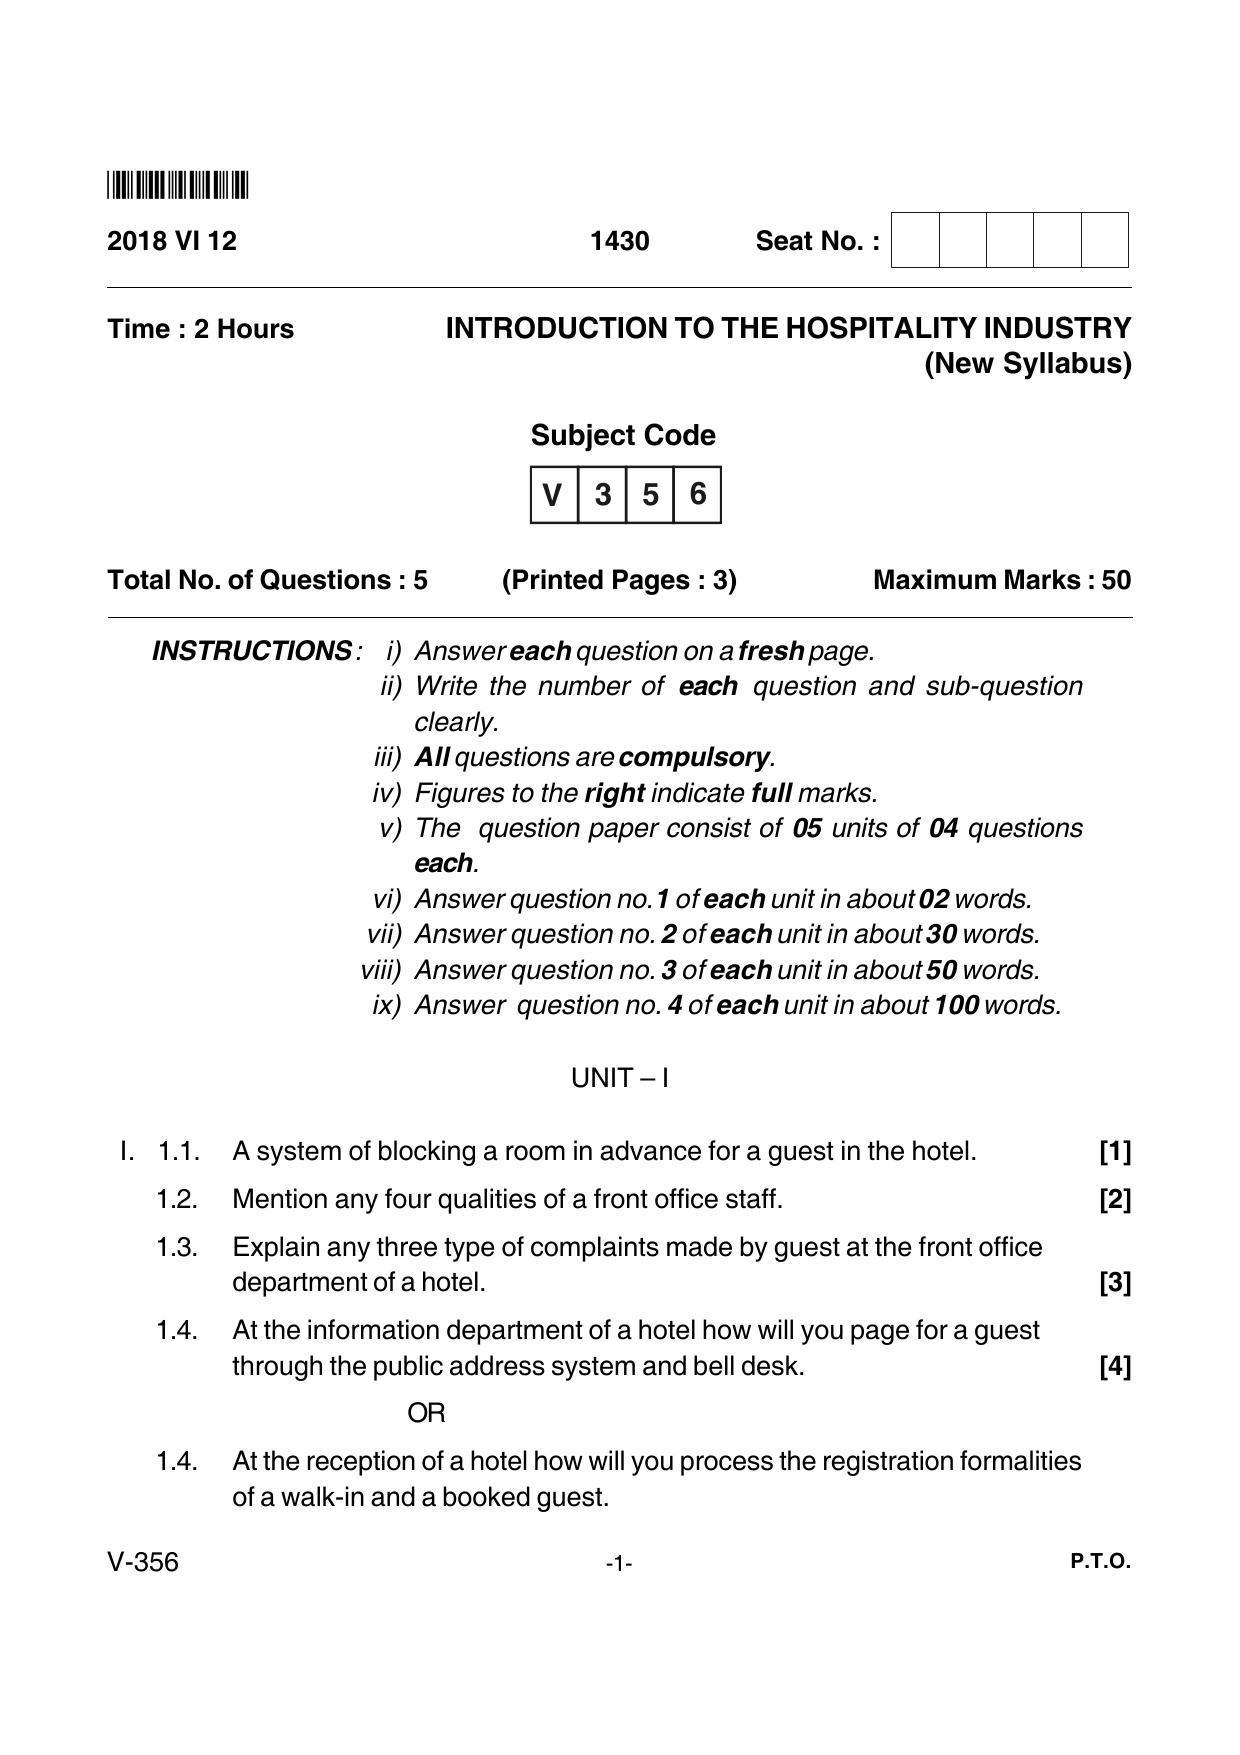 Goa Board Class 12 Introduction to Hospitality Industry  Voc 356 New Syllabus (June 2018) Question Paper - Page 1